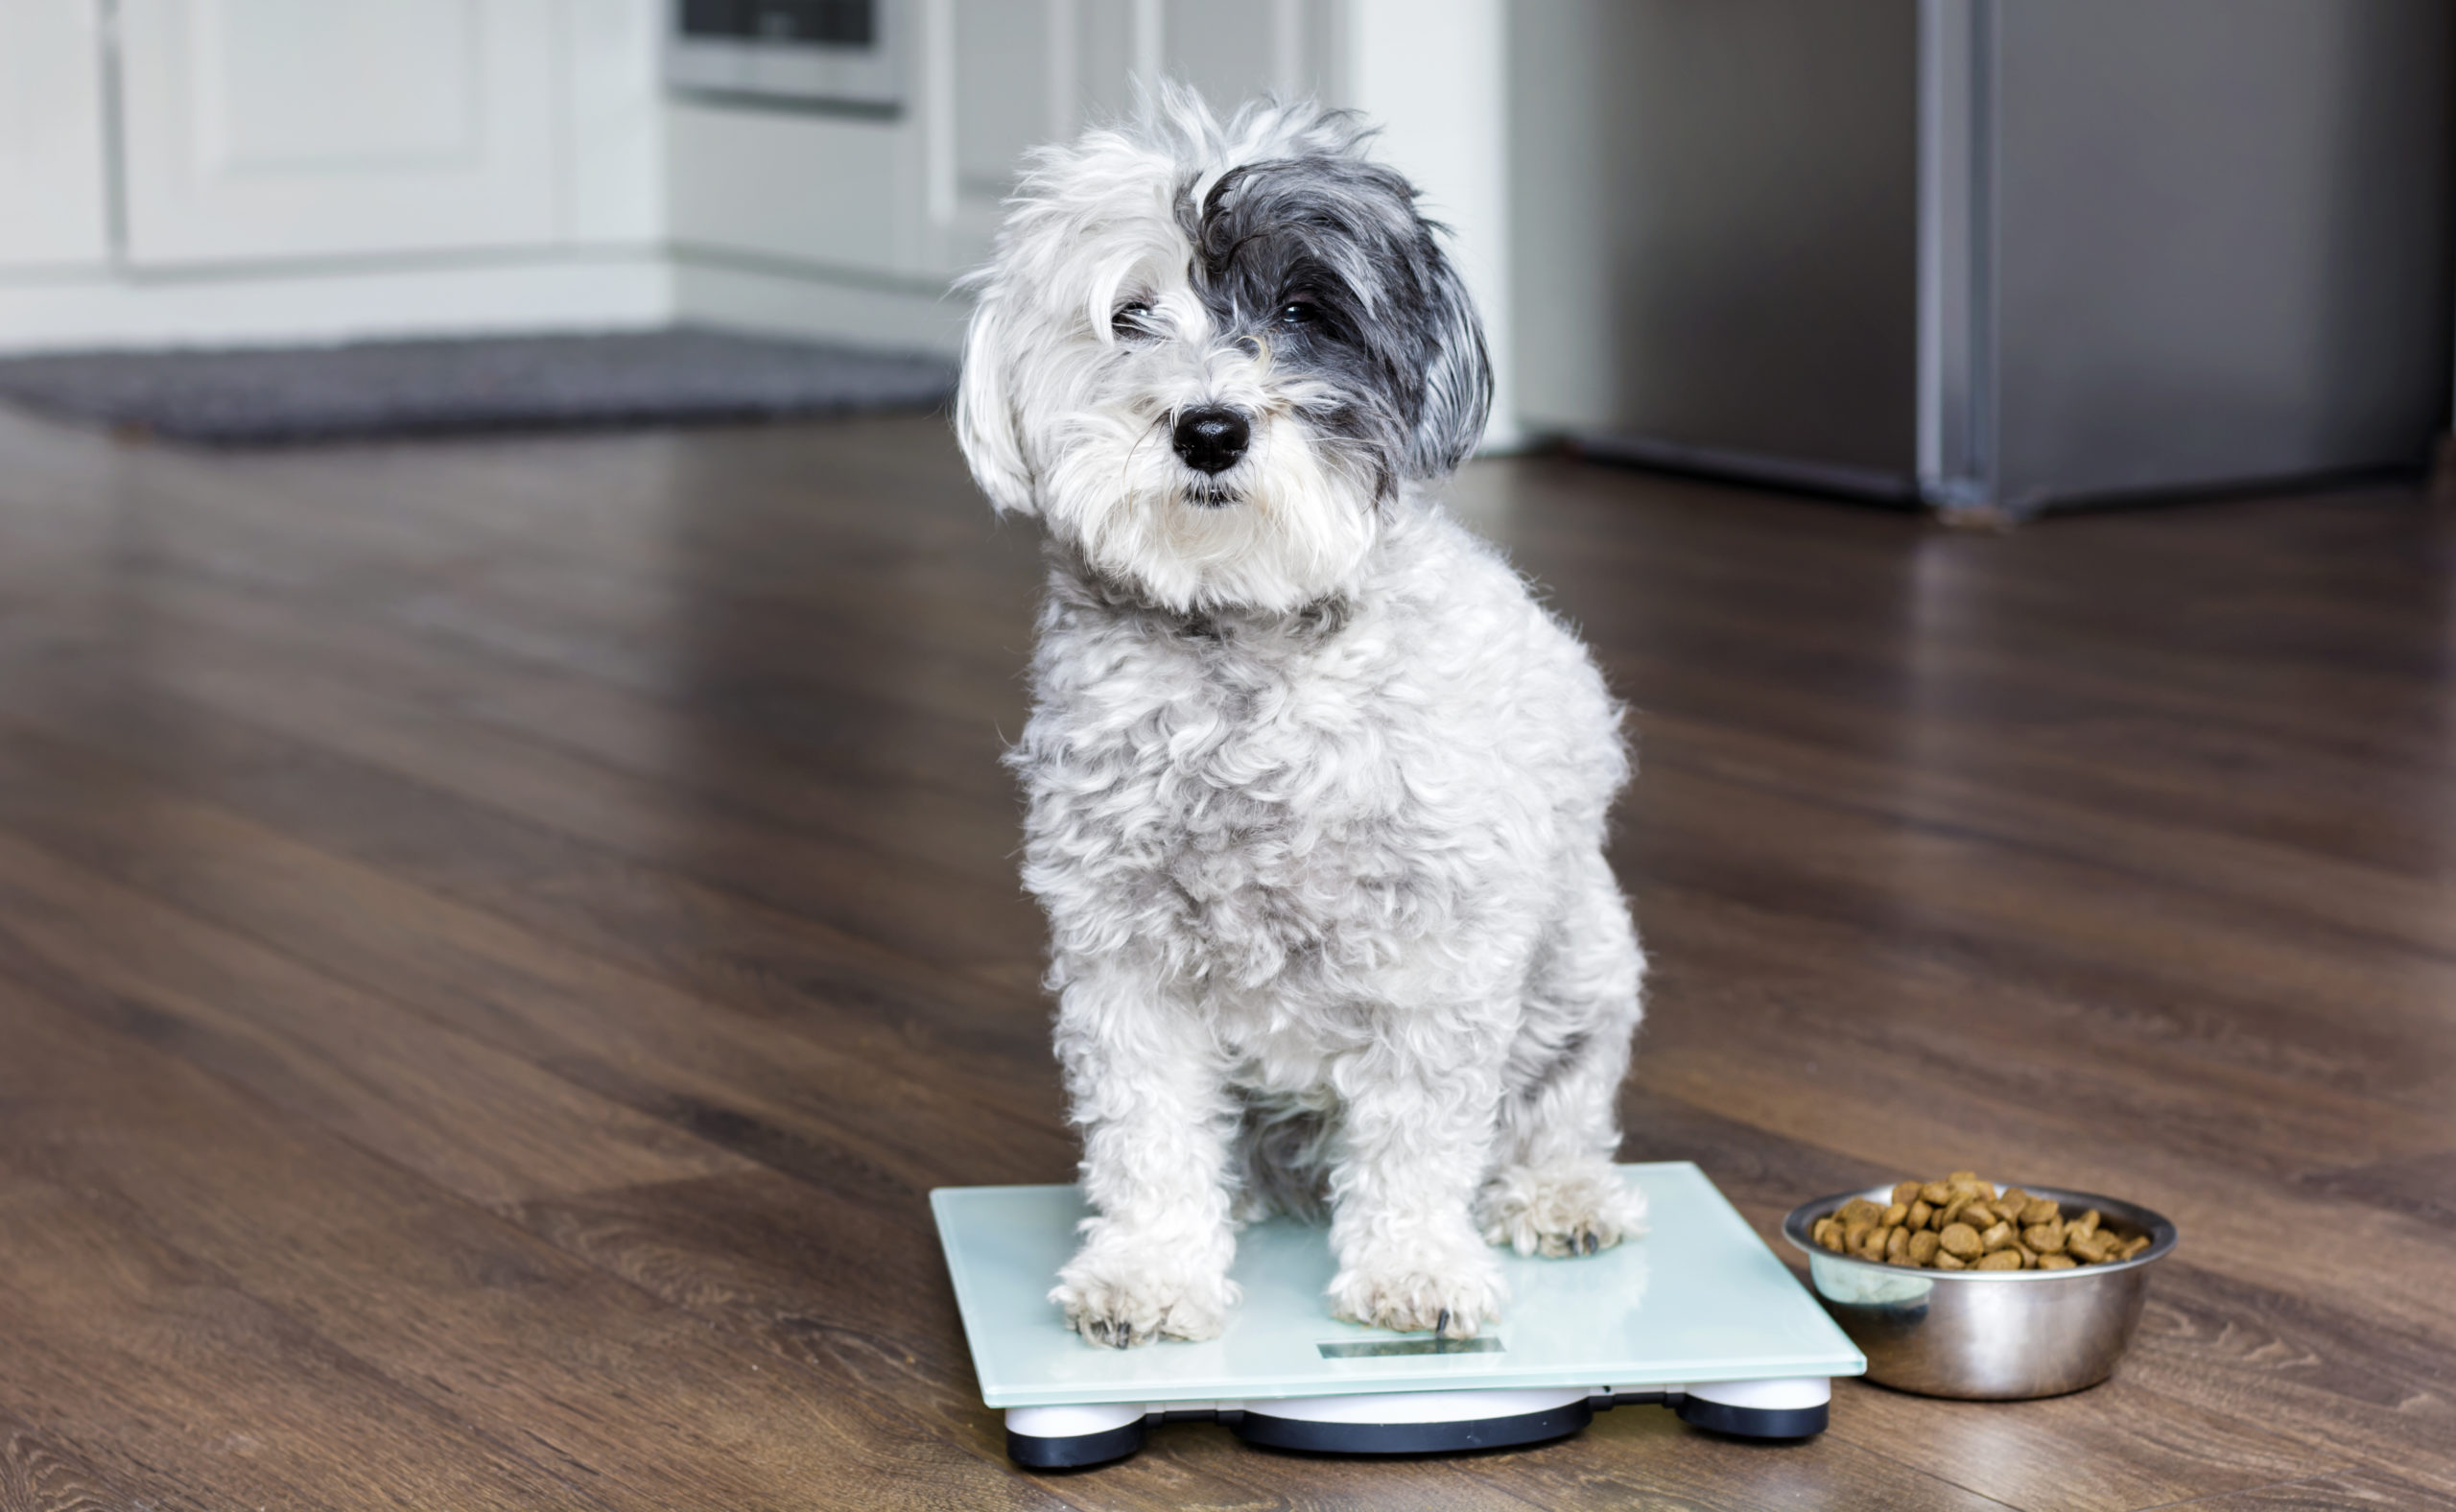 Nutritional support helps canine patients maintain healthy weight